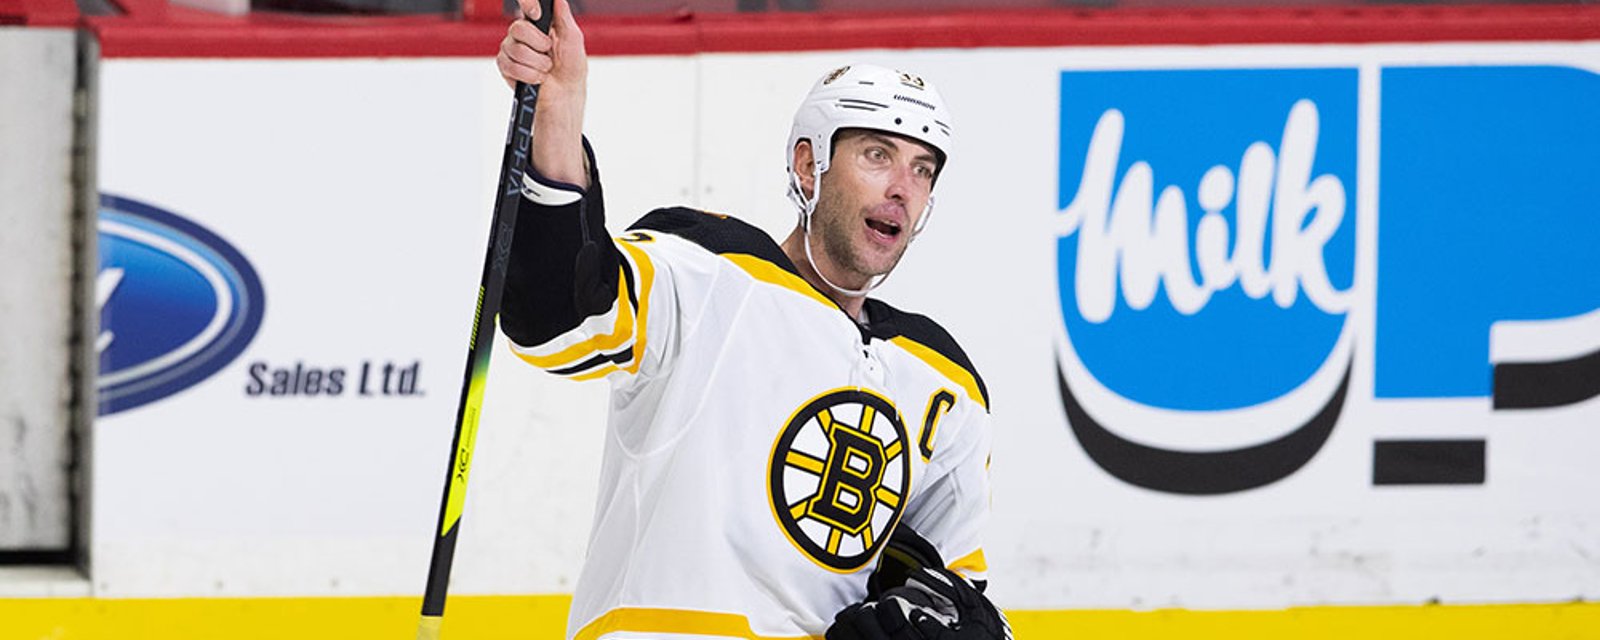 Chara makes history and goes into the NHL record books last night